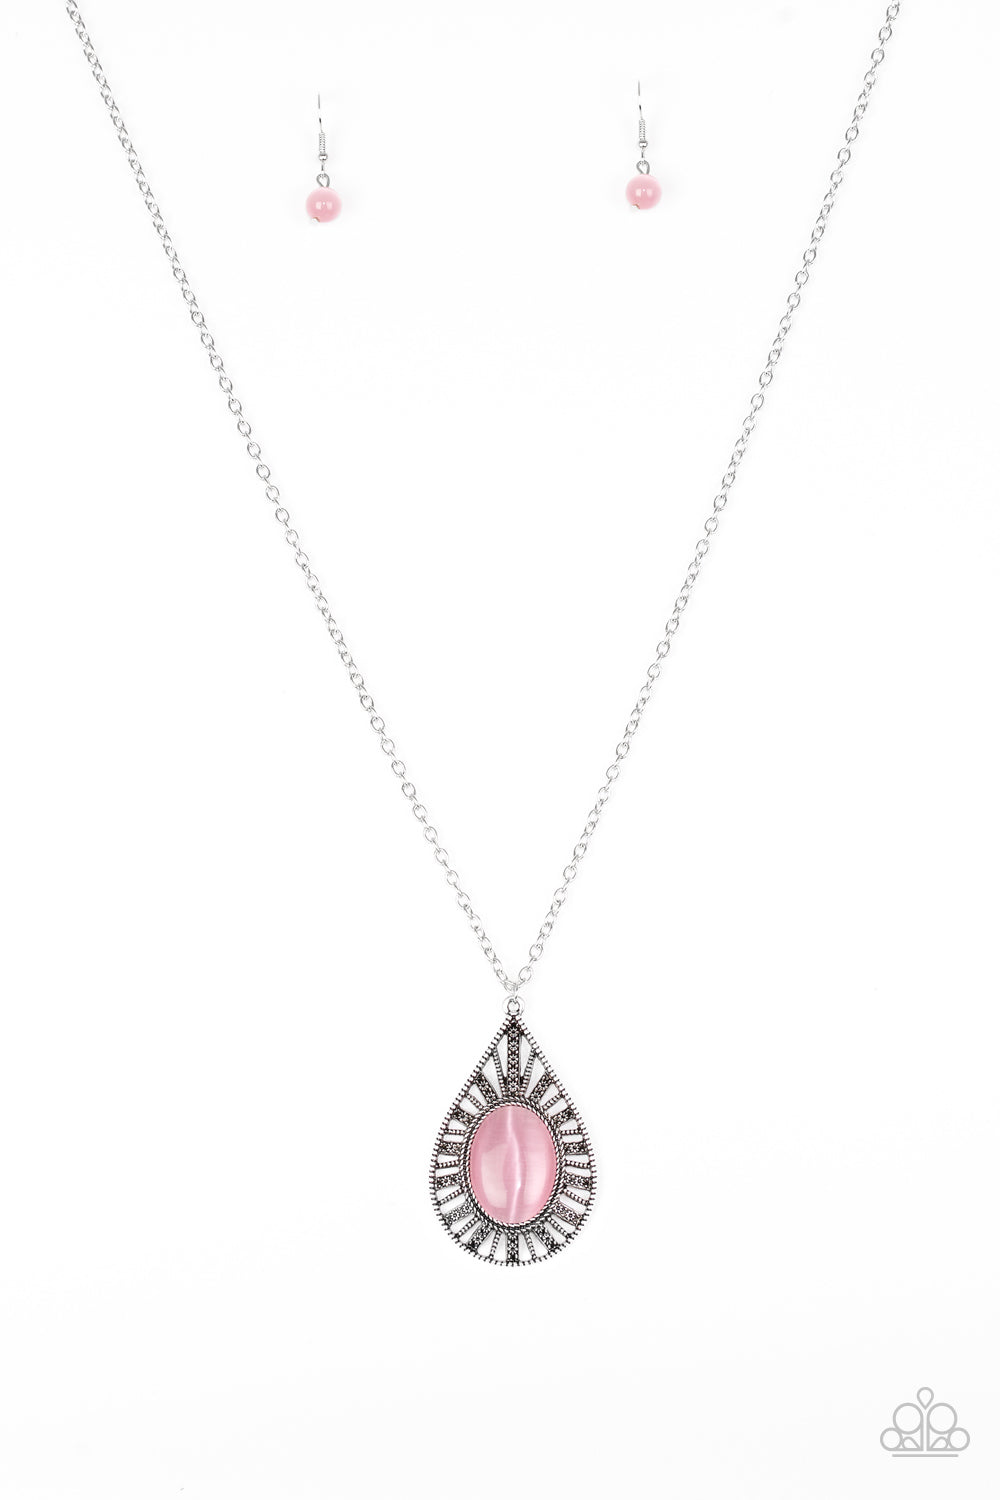 Total Tranquility - Pink Necklace Set